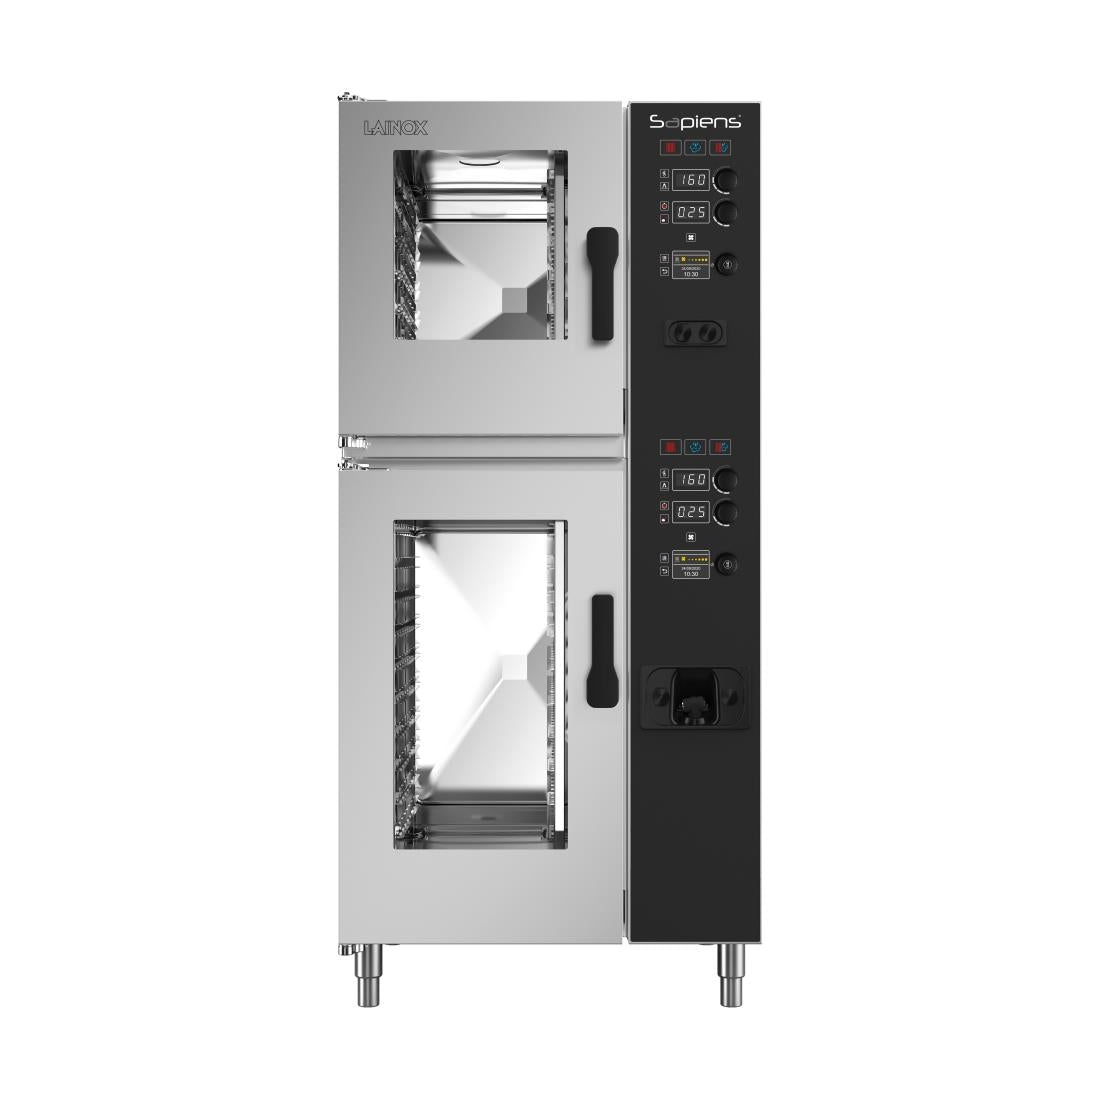 HP584 Lainox Sapiens Boosted Electric Touch Screen Combi Oven SAE161BV 16X1/1GN JD Catering Equipment Solutions Ltd